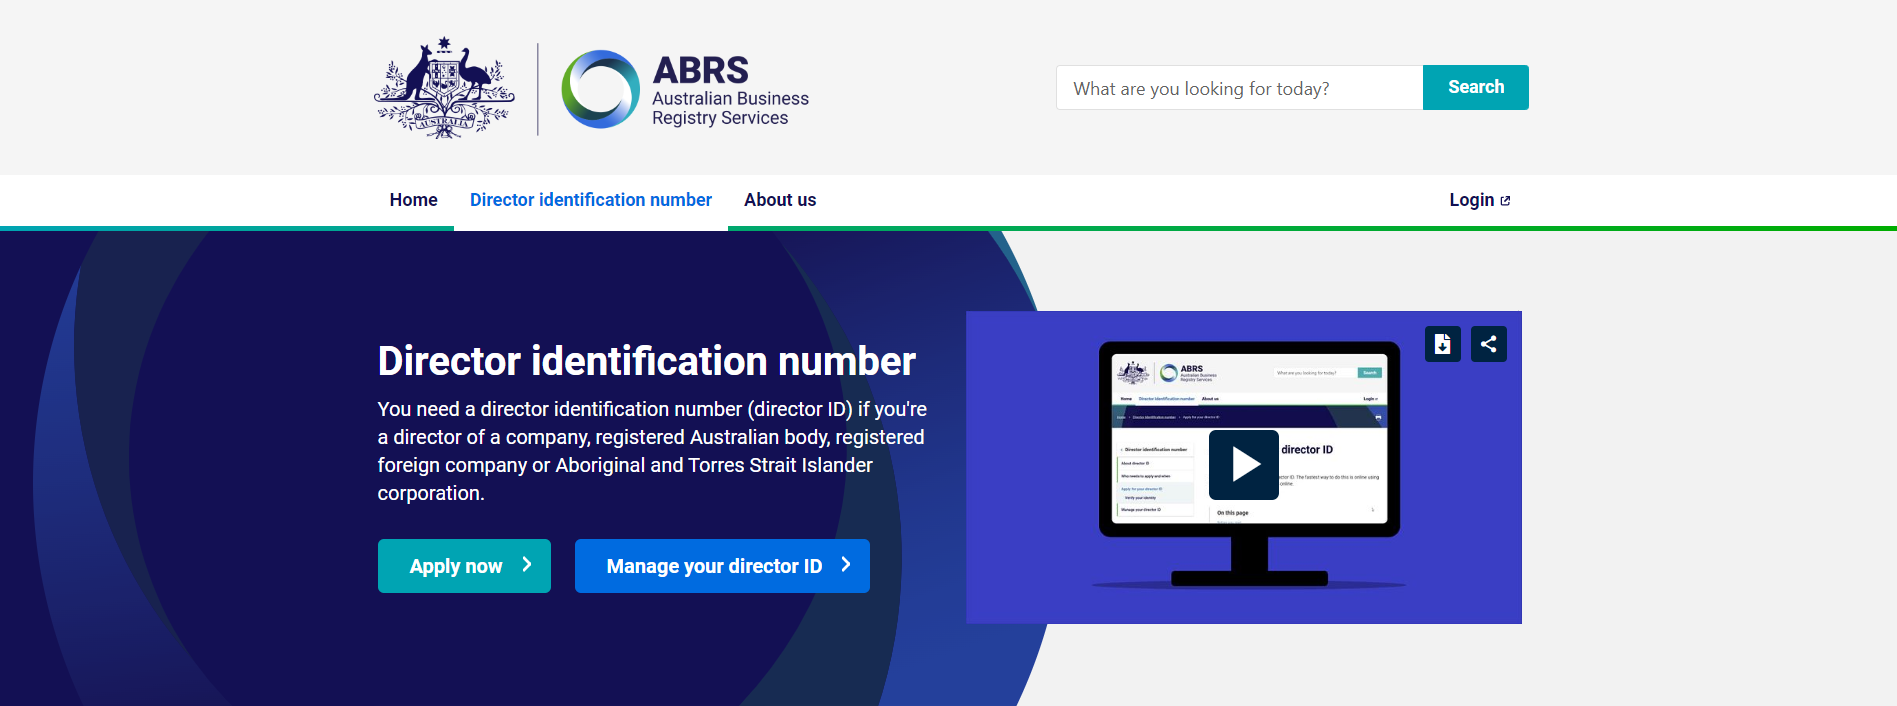 Apply for your Director ID - Australian Business Registry Services (ABRS)